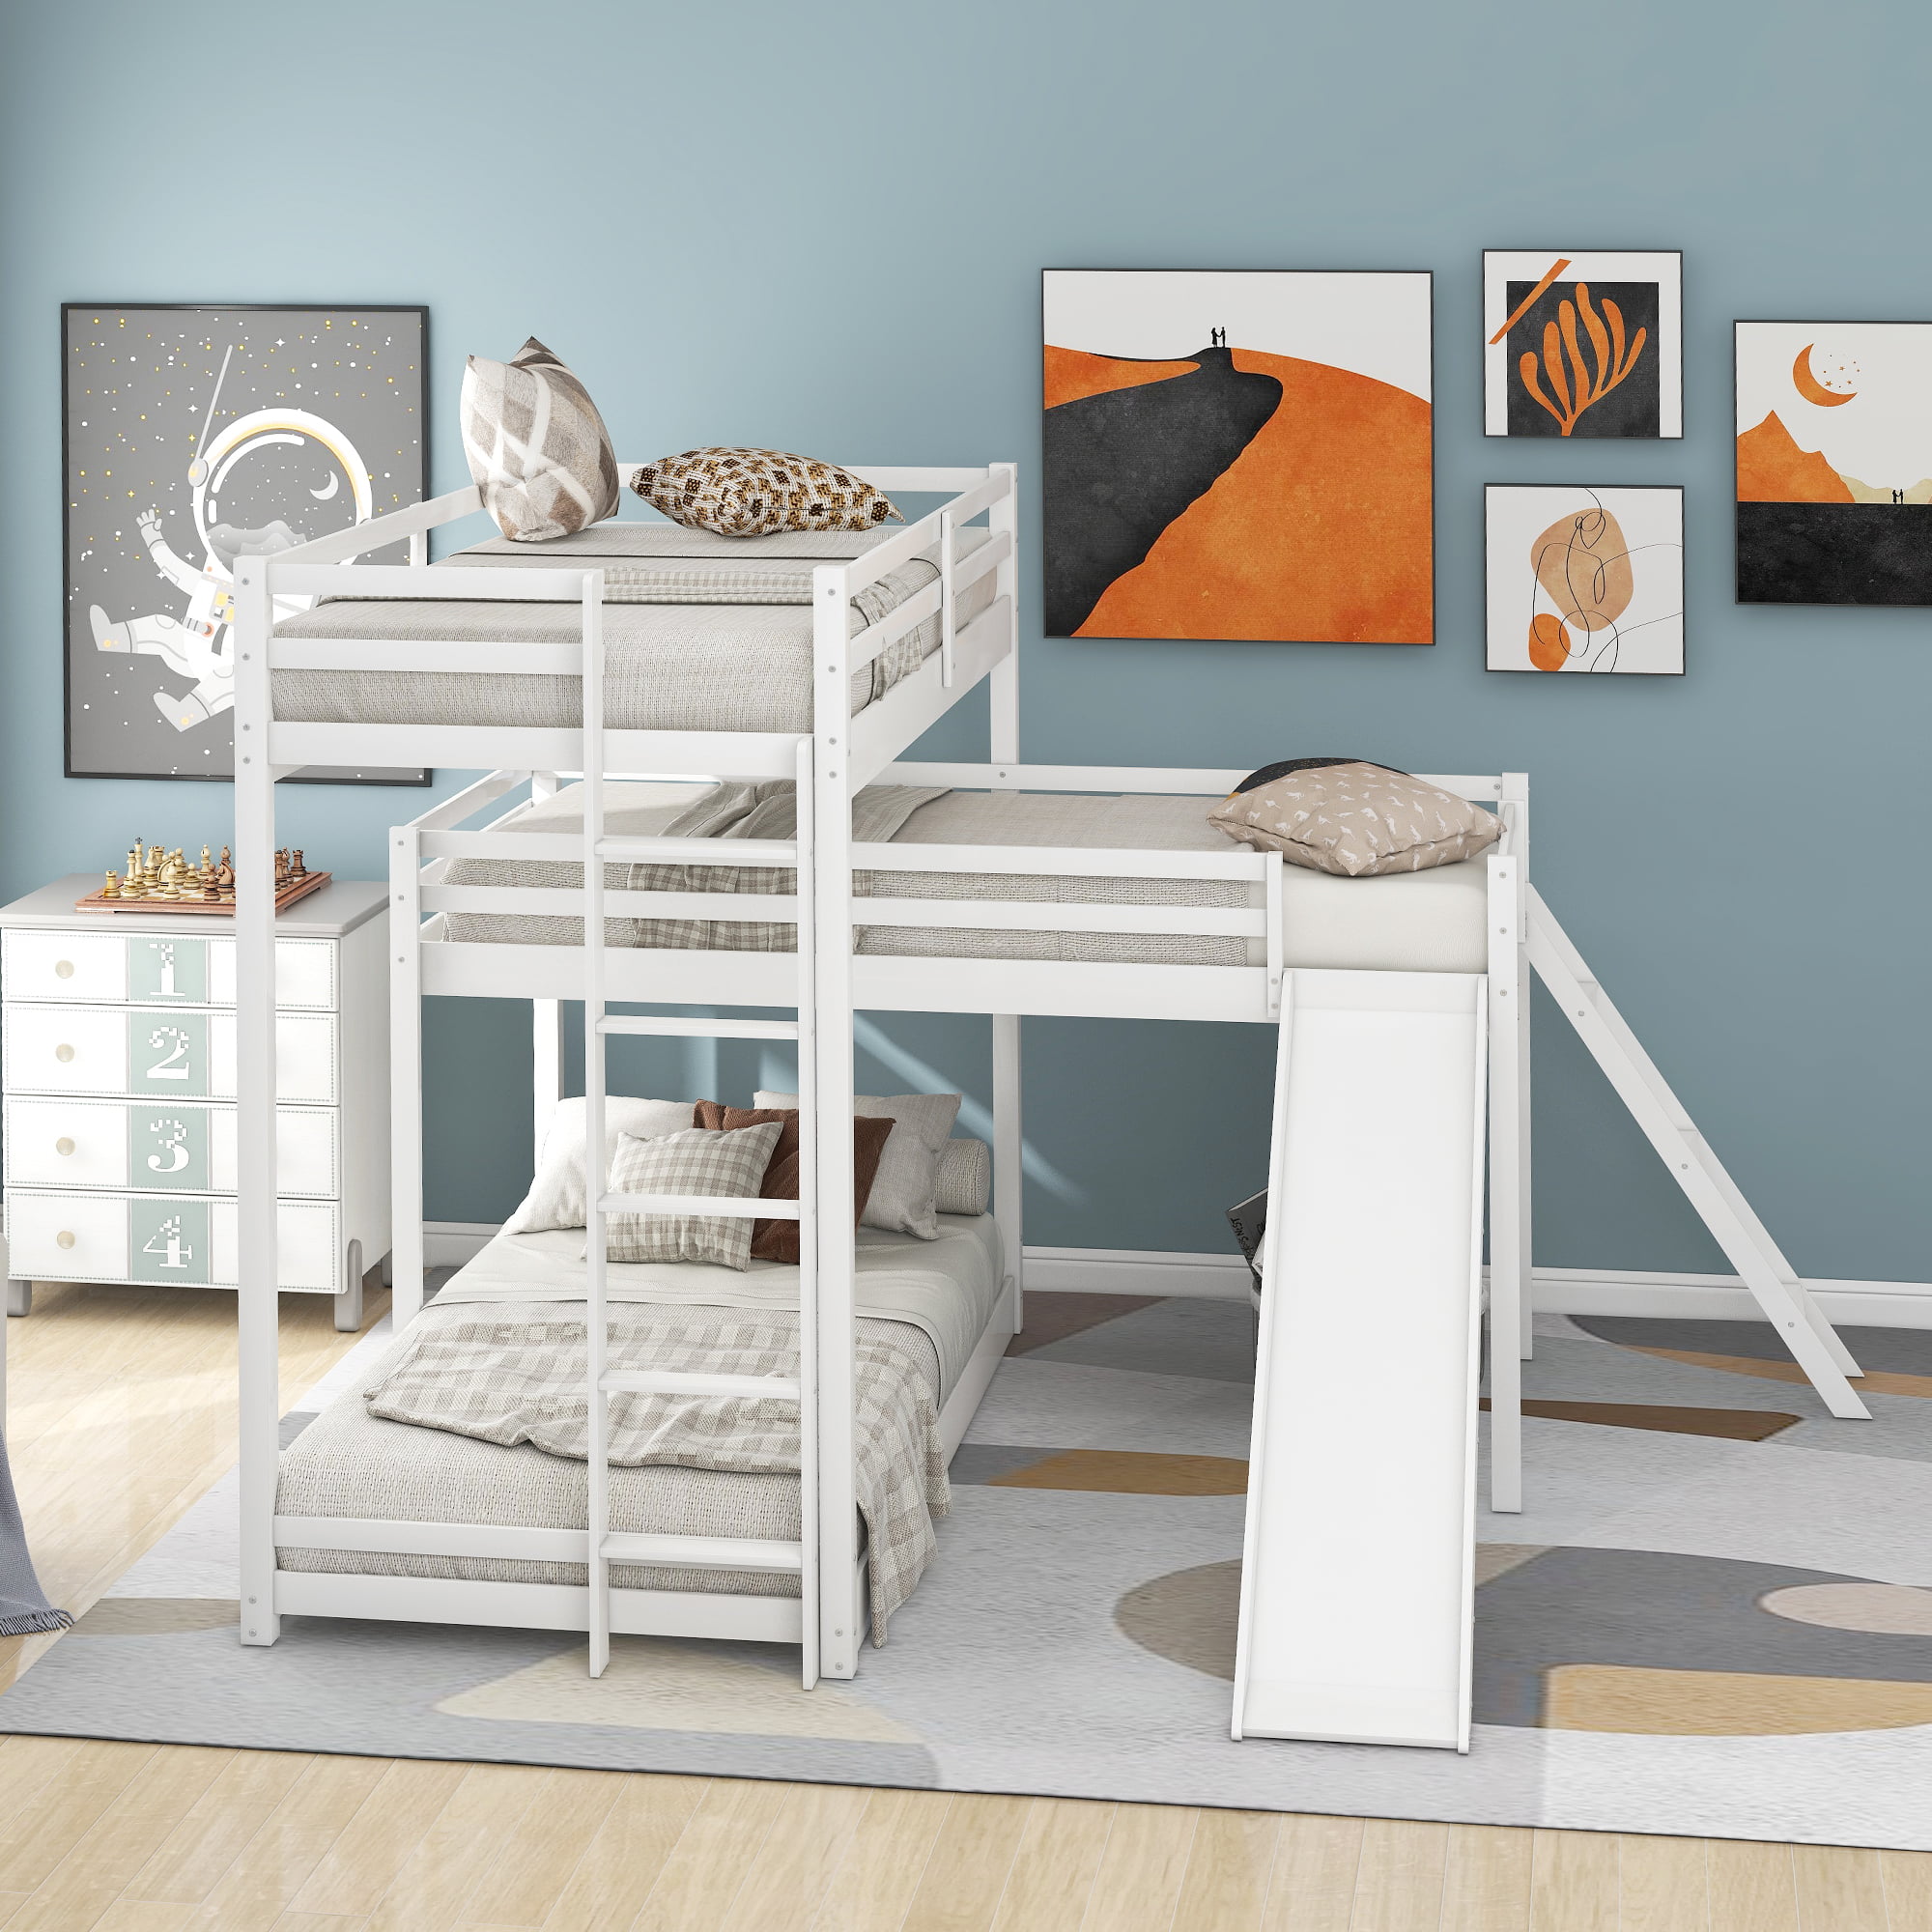 L Shaped Wood Triple Bunk Bed Frame, How To Attach Bunk Beds Together